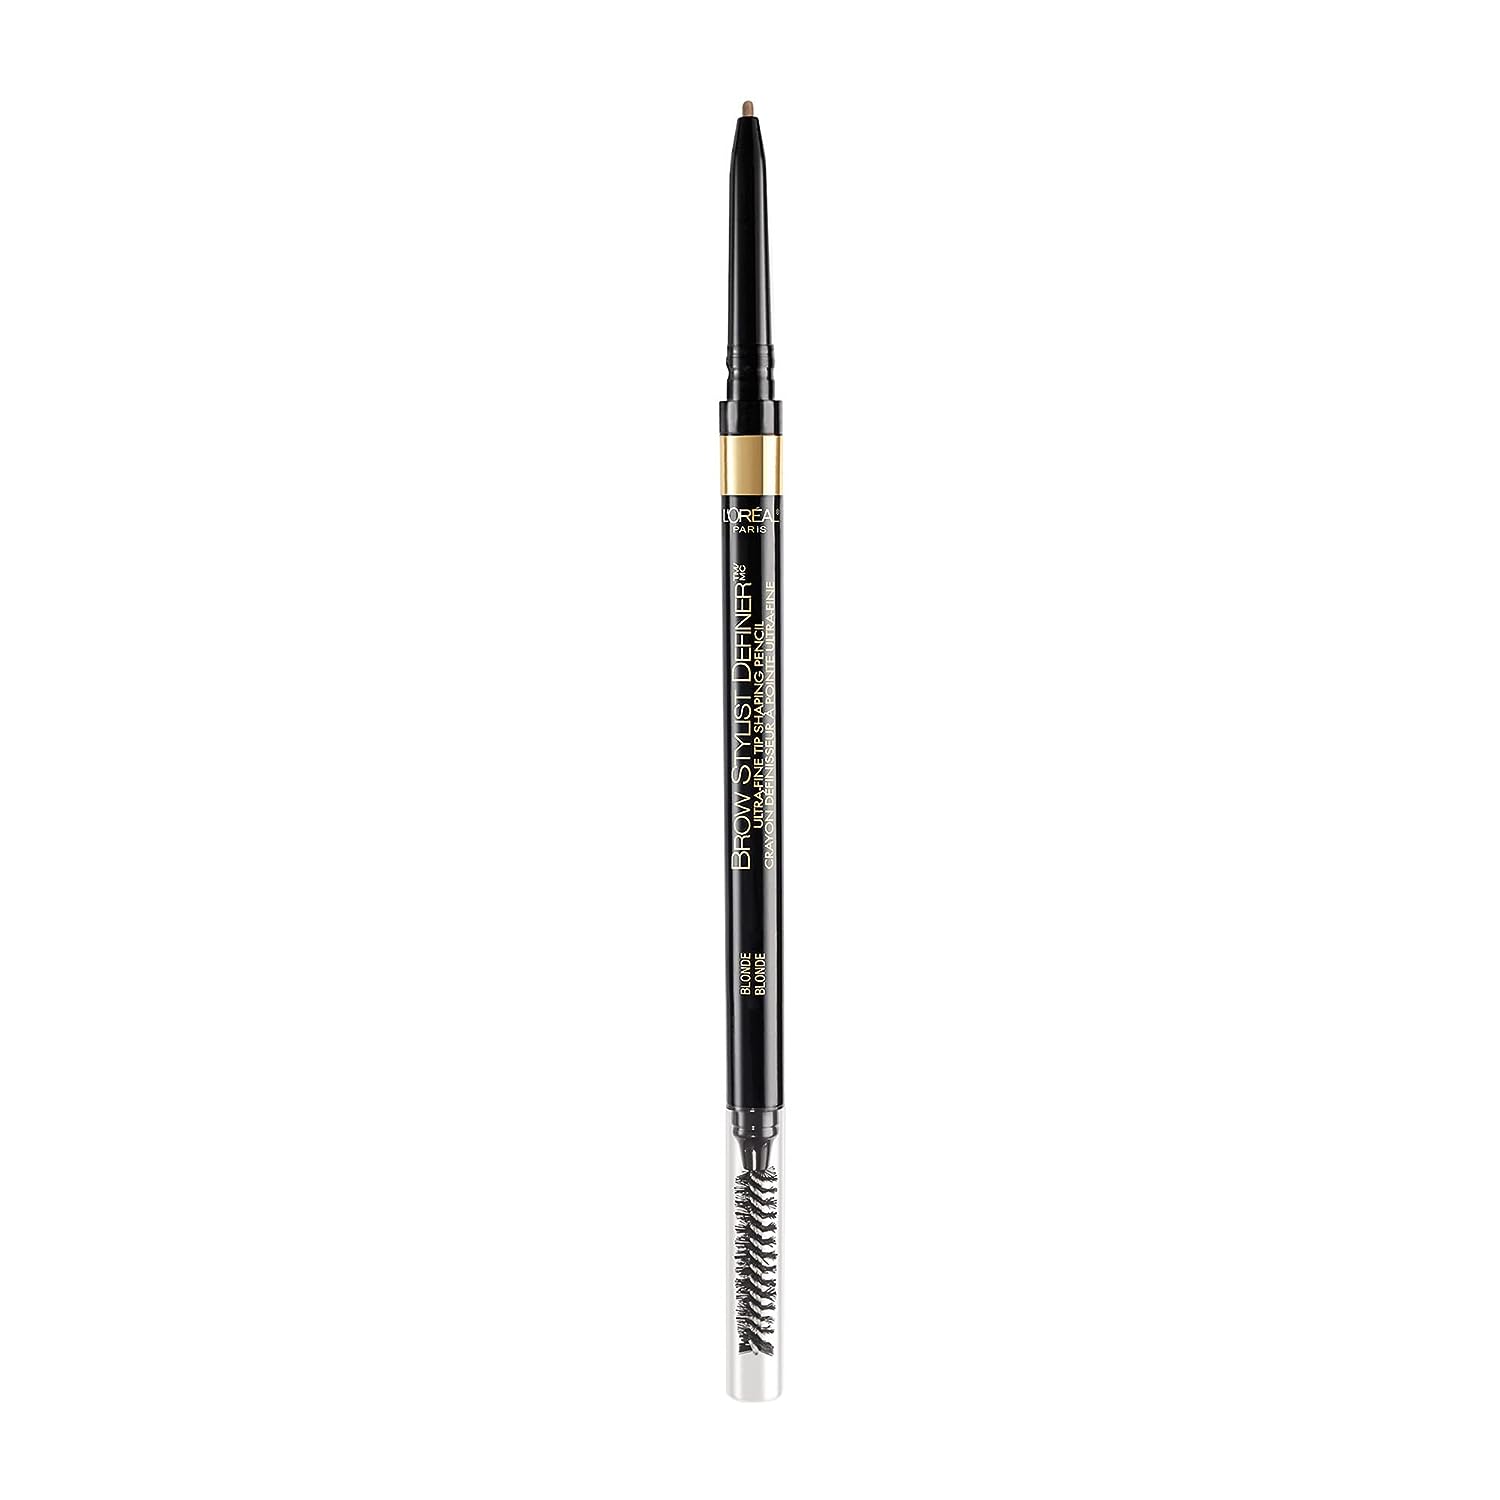 L'Oreal Paris Makeup Brow Stylist Definer Waterproof Eyebrow Pencil, Ultra-Fine Mechanical Pencil, Draws Tiny Brow Hairs and Fills in Sparse Areas and Gaps, Blonde, 0.003  (Pack of 1)